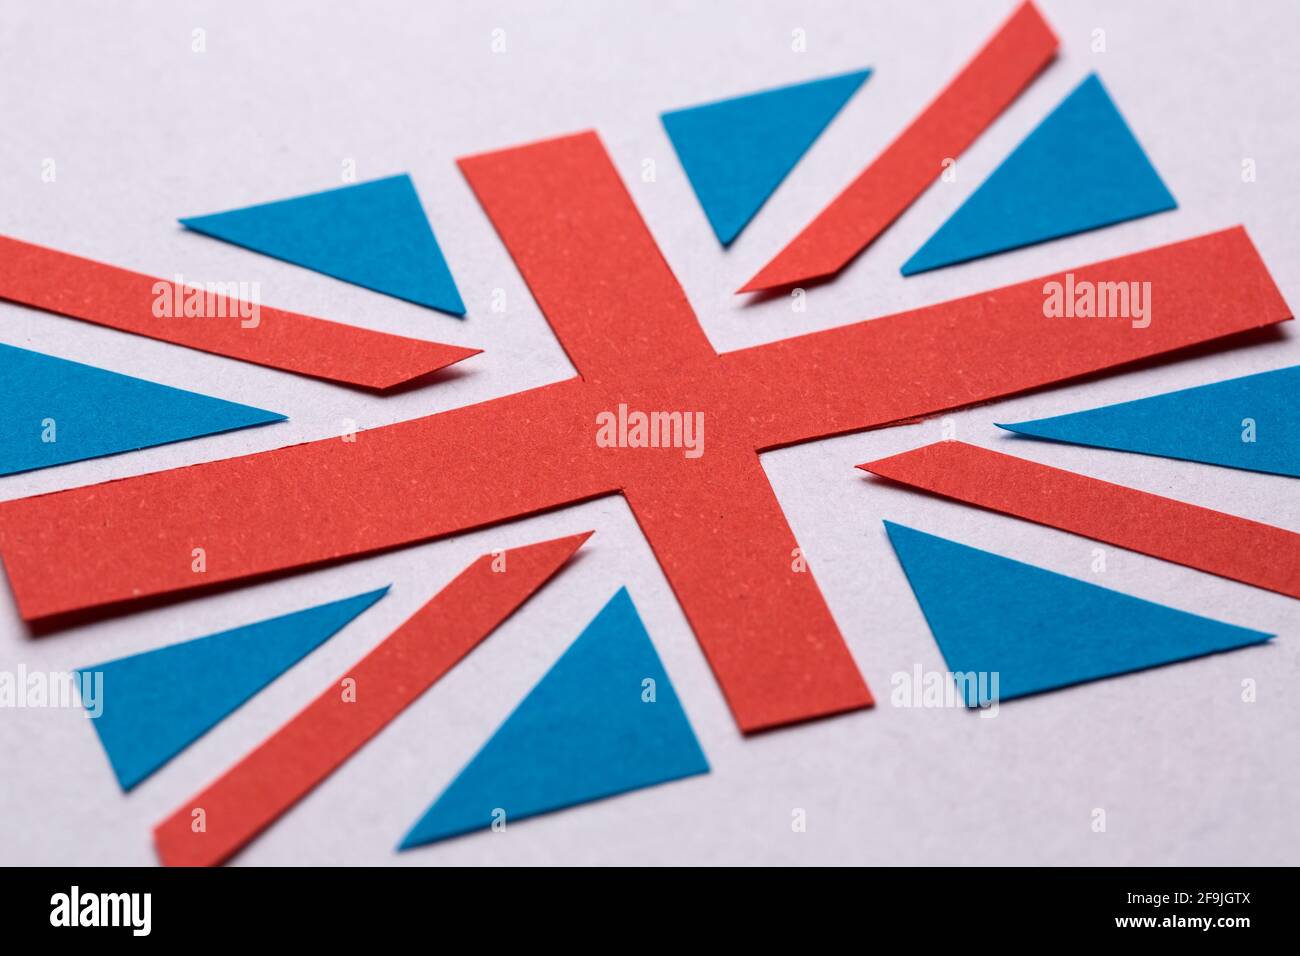 The flag of Great Britain cut out from the blue and red paper. Stock Photo